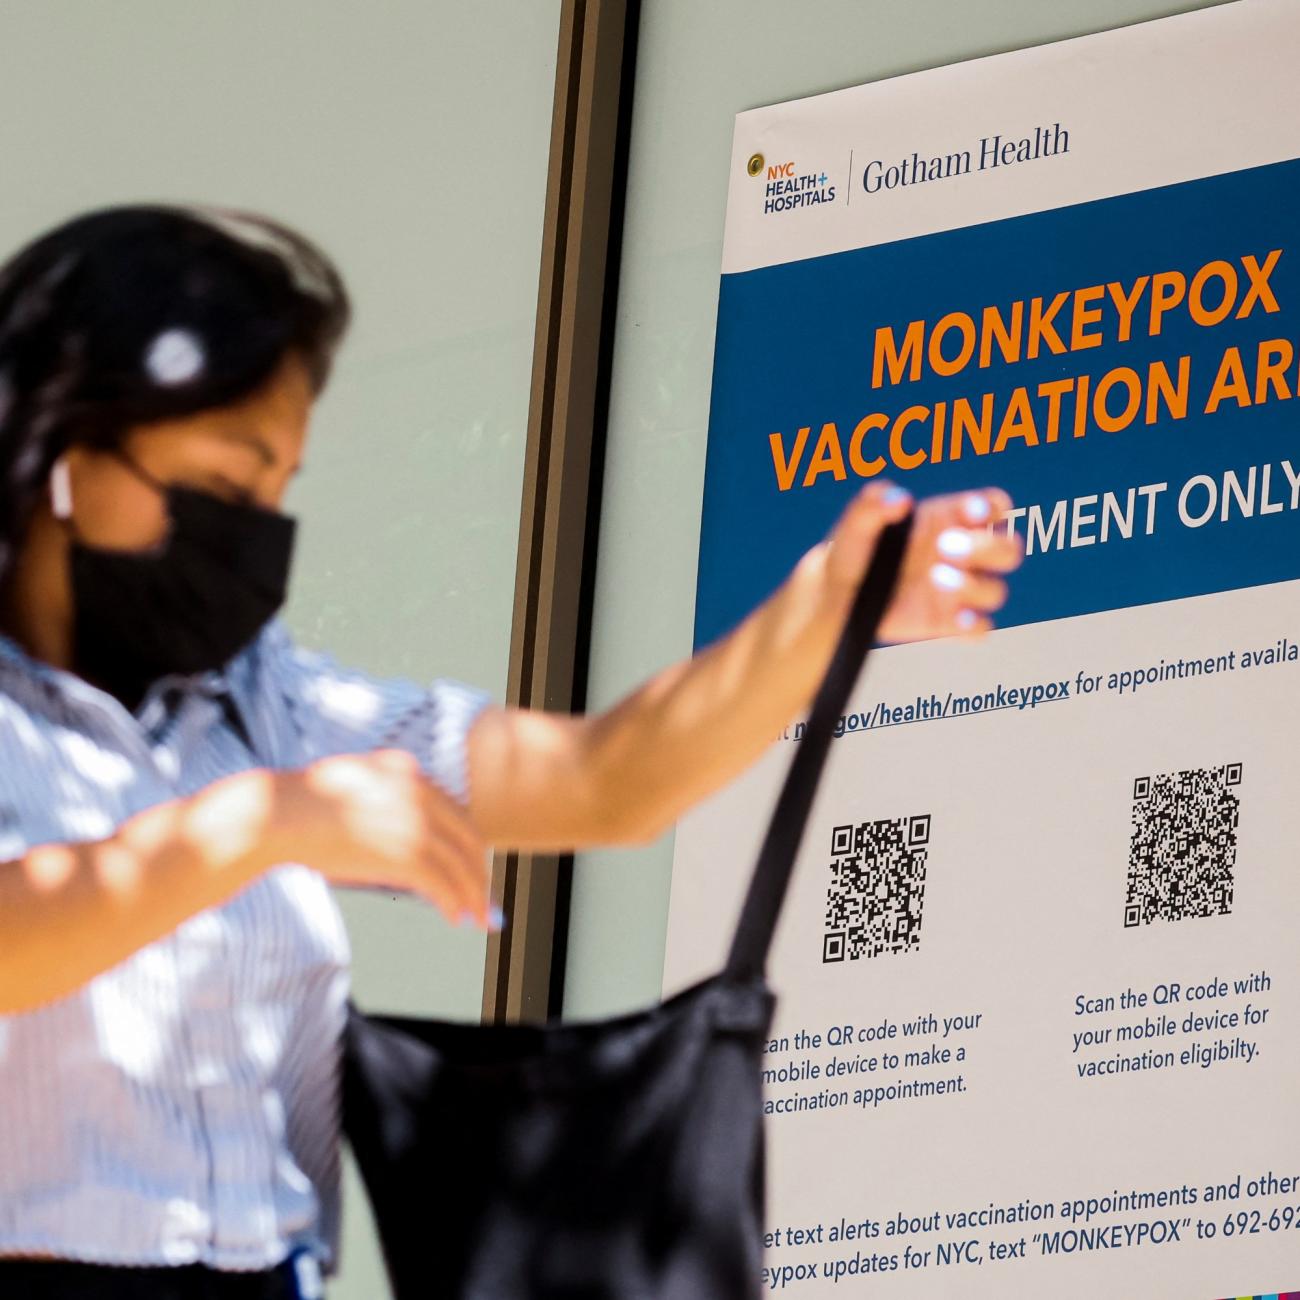 A woman with long dark hair in a light blue blouse and black mask searches for something in a black tote bag as she walks past a blue sign with orange letters reading "monkeypox vaccination area"